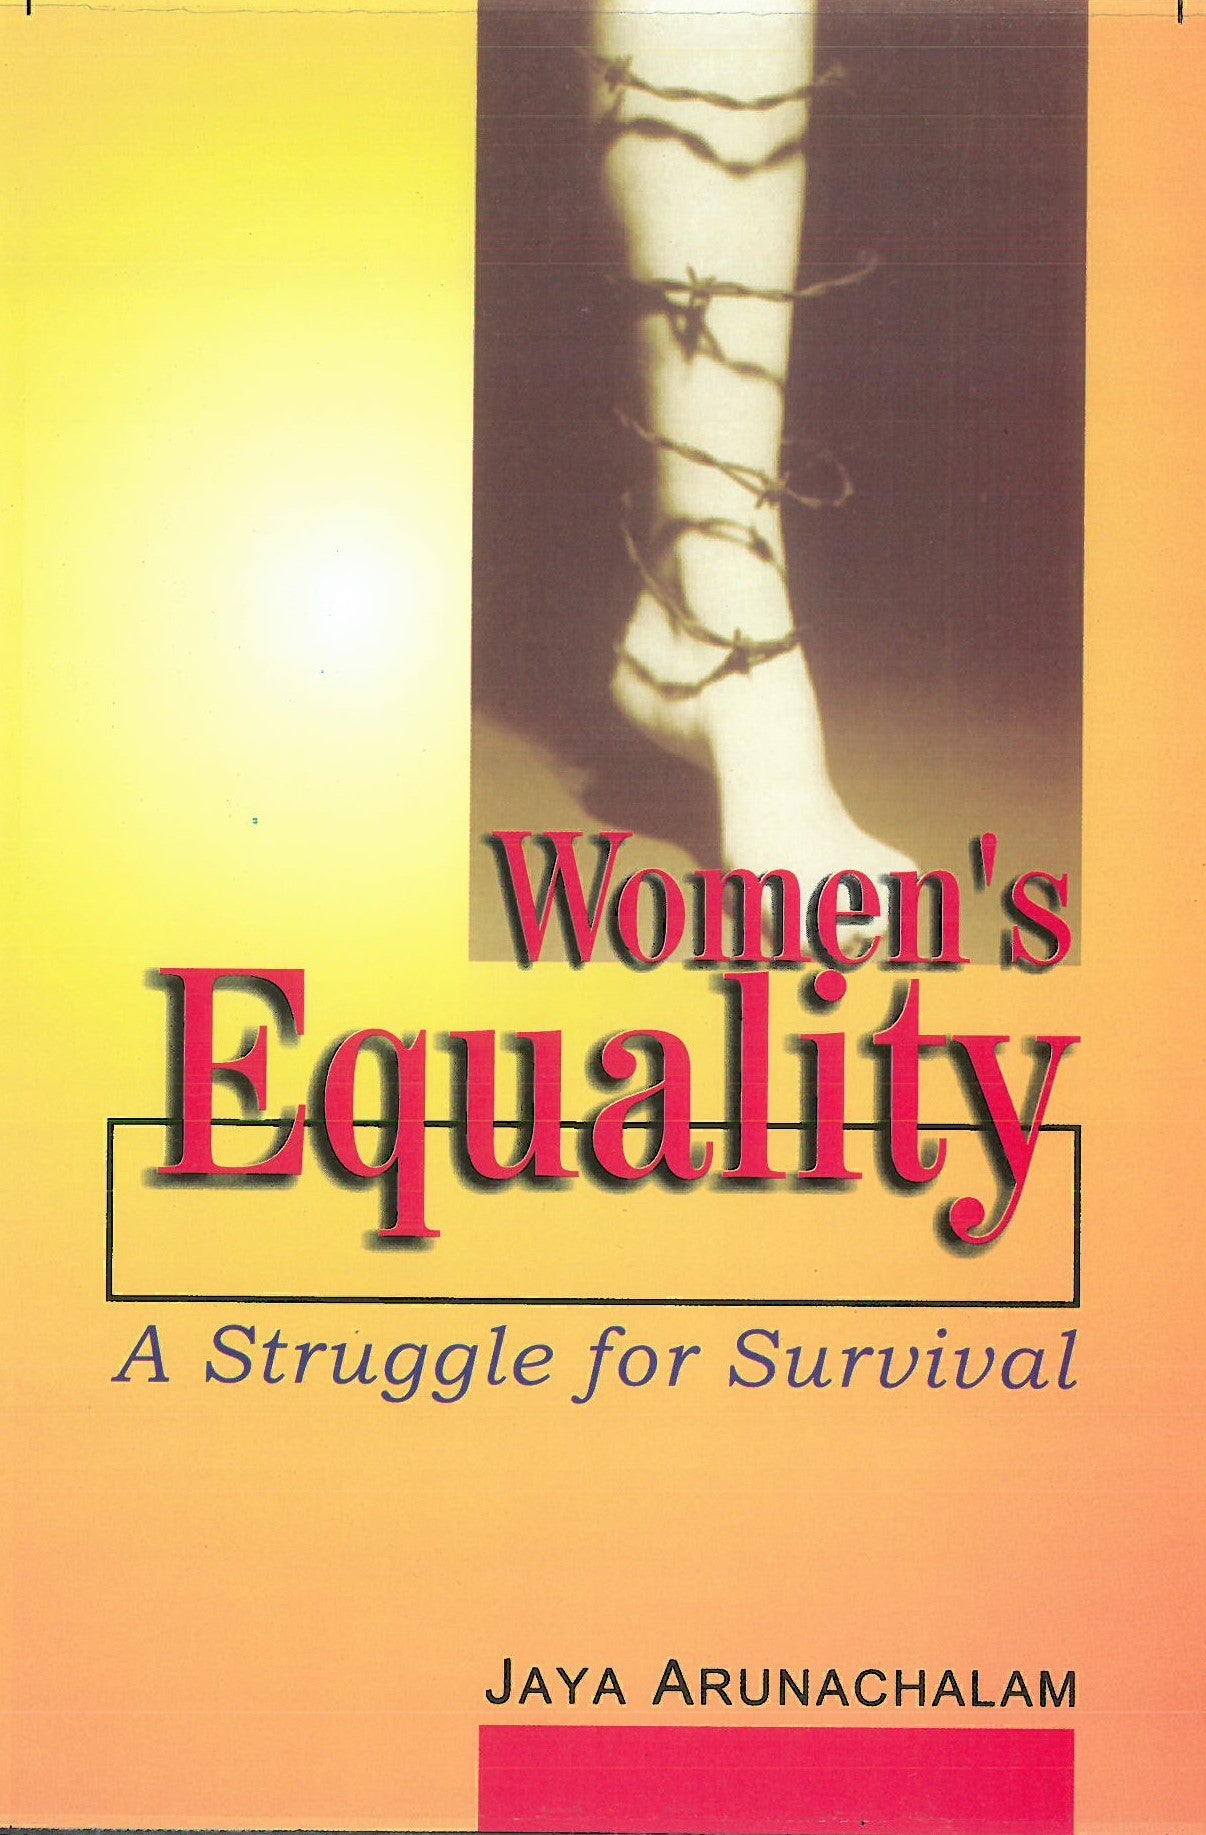 Women's Equality: a Struggle For Survival [Hardcover]